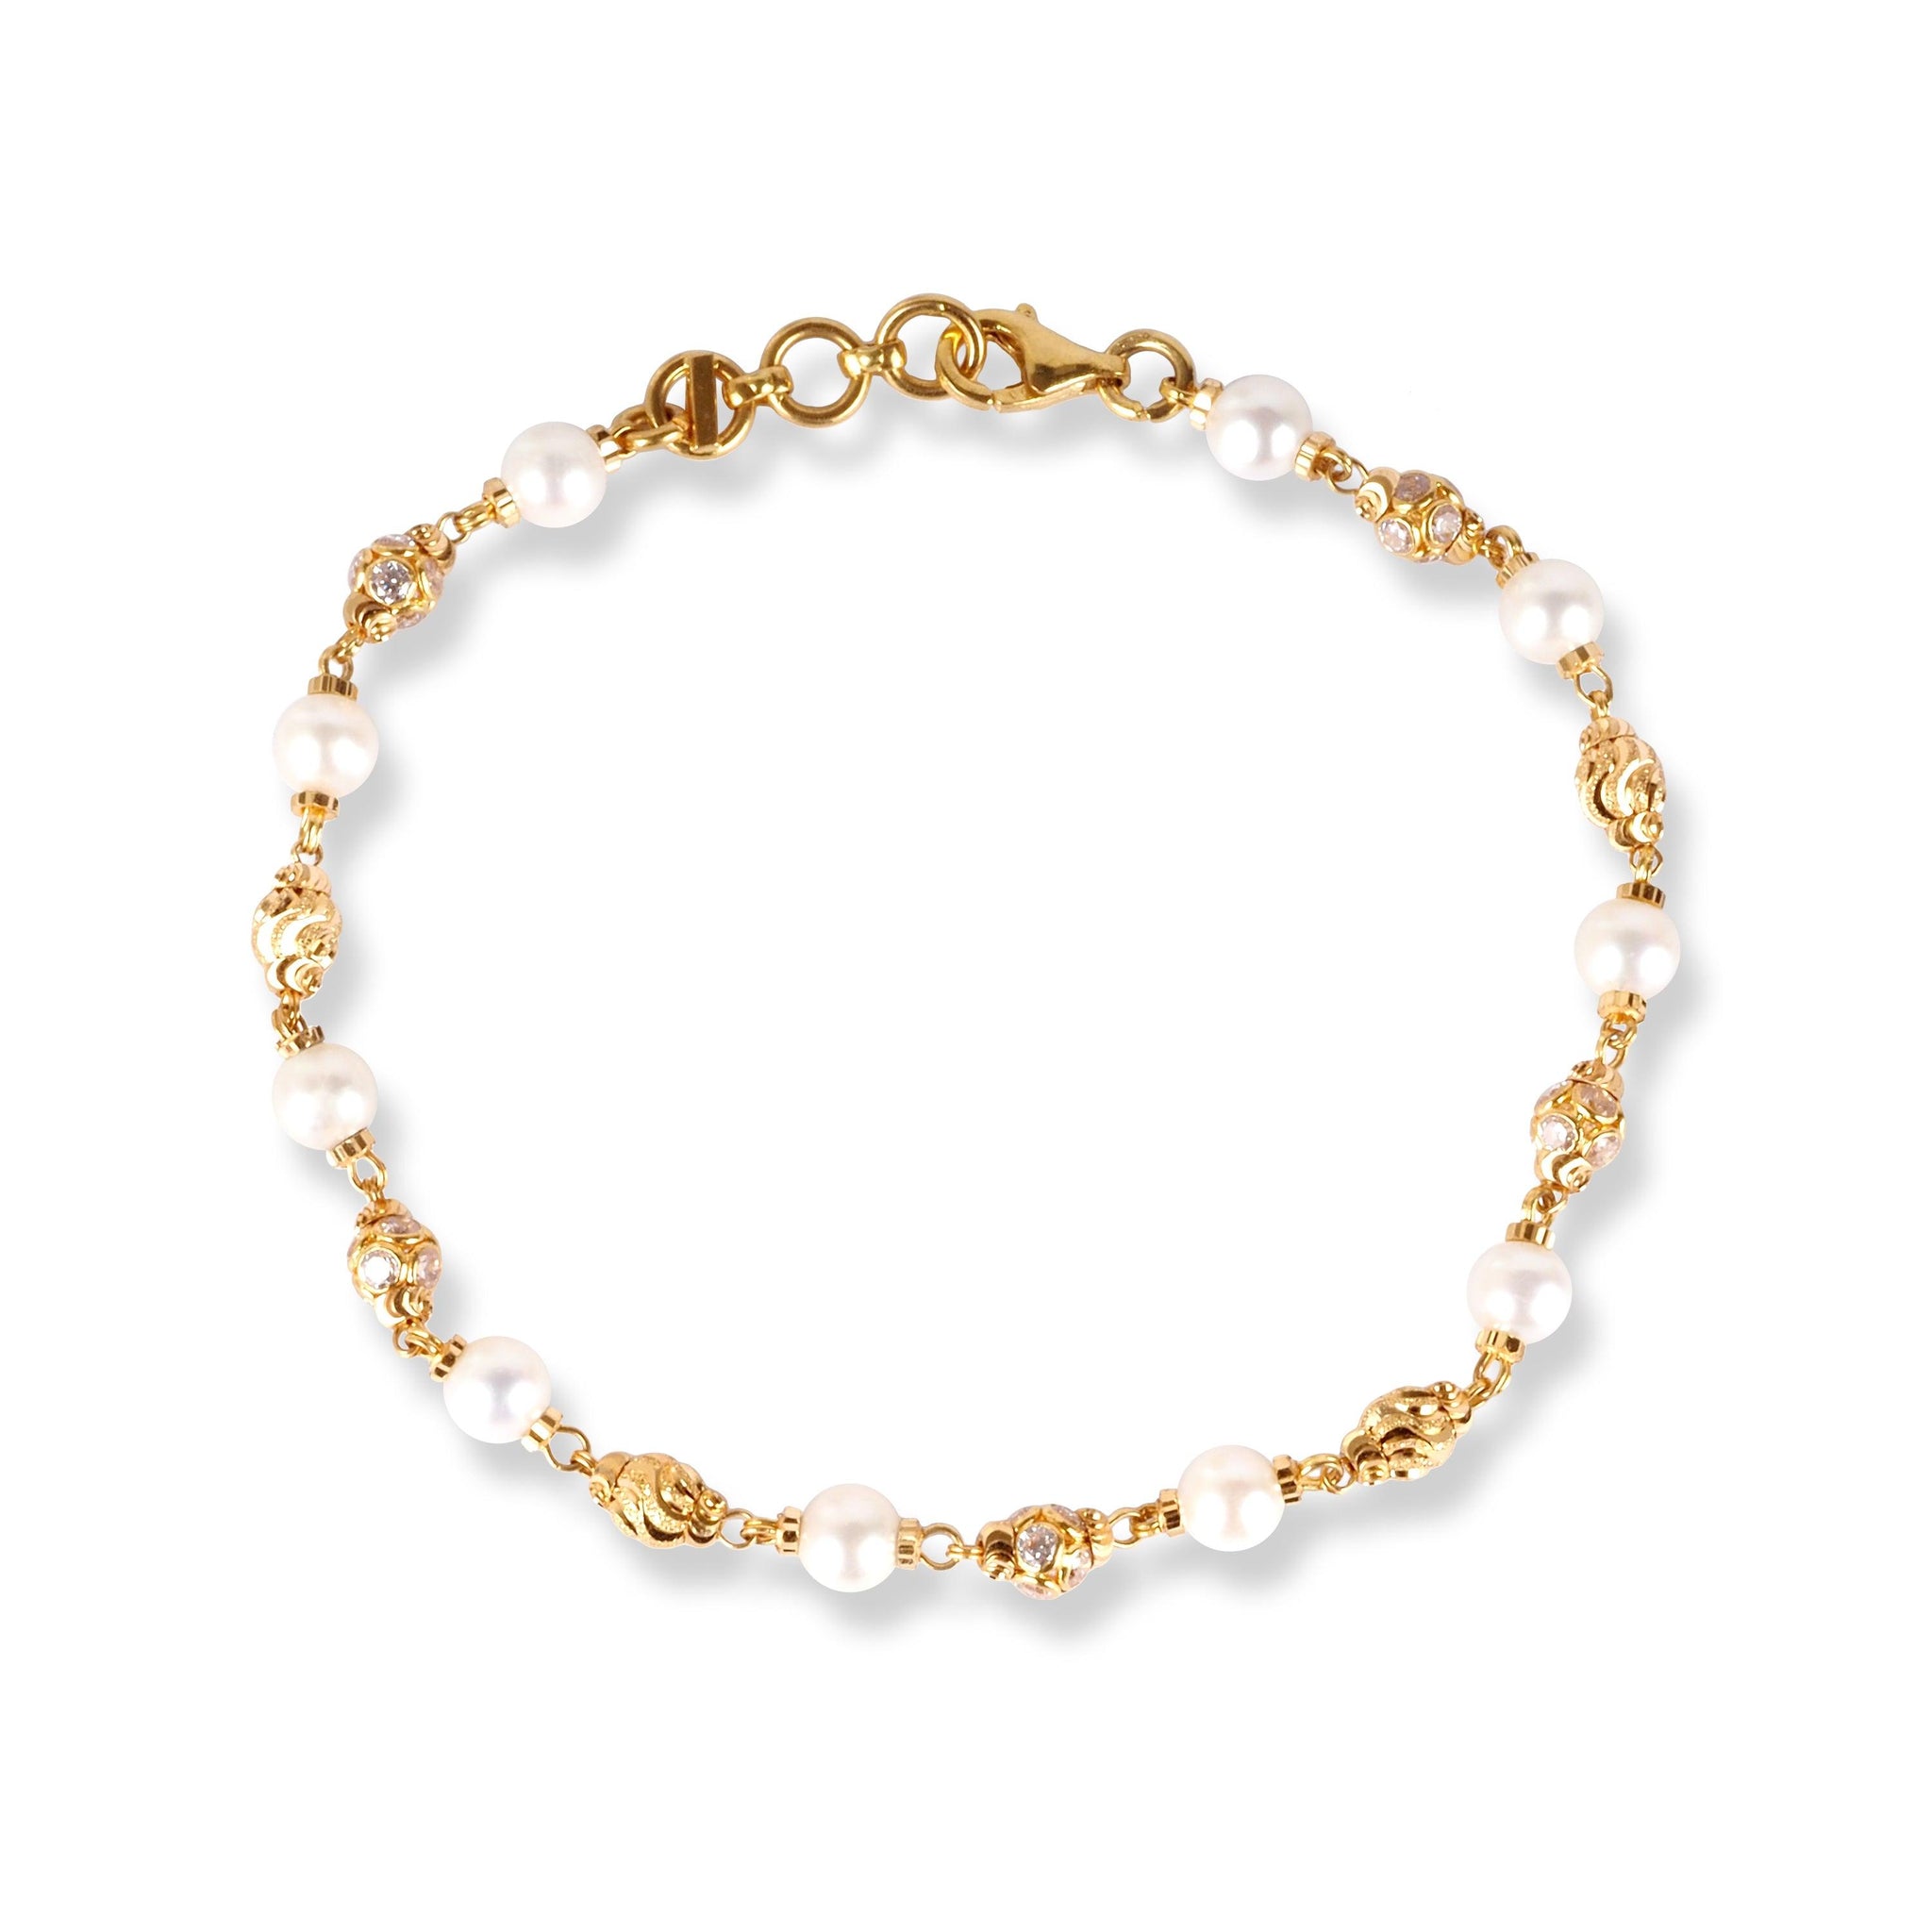 22ct Gold Bracelet with Pearl and Cubic Zirconia Stones LBR-7129